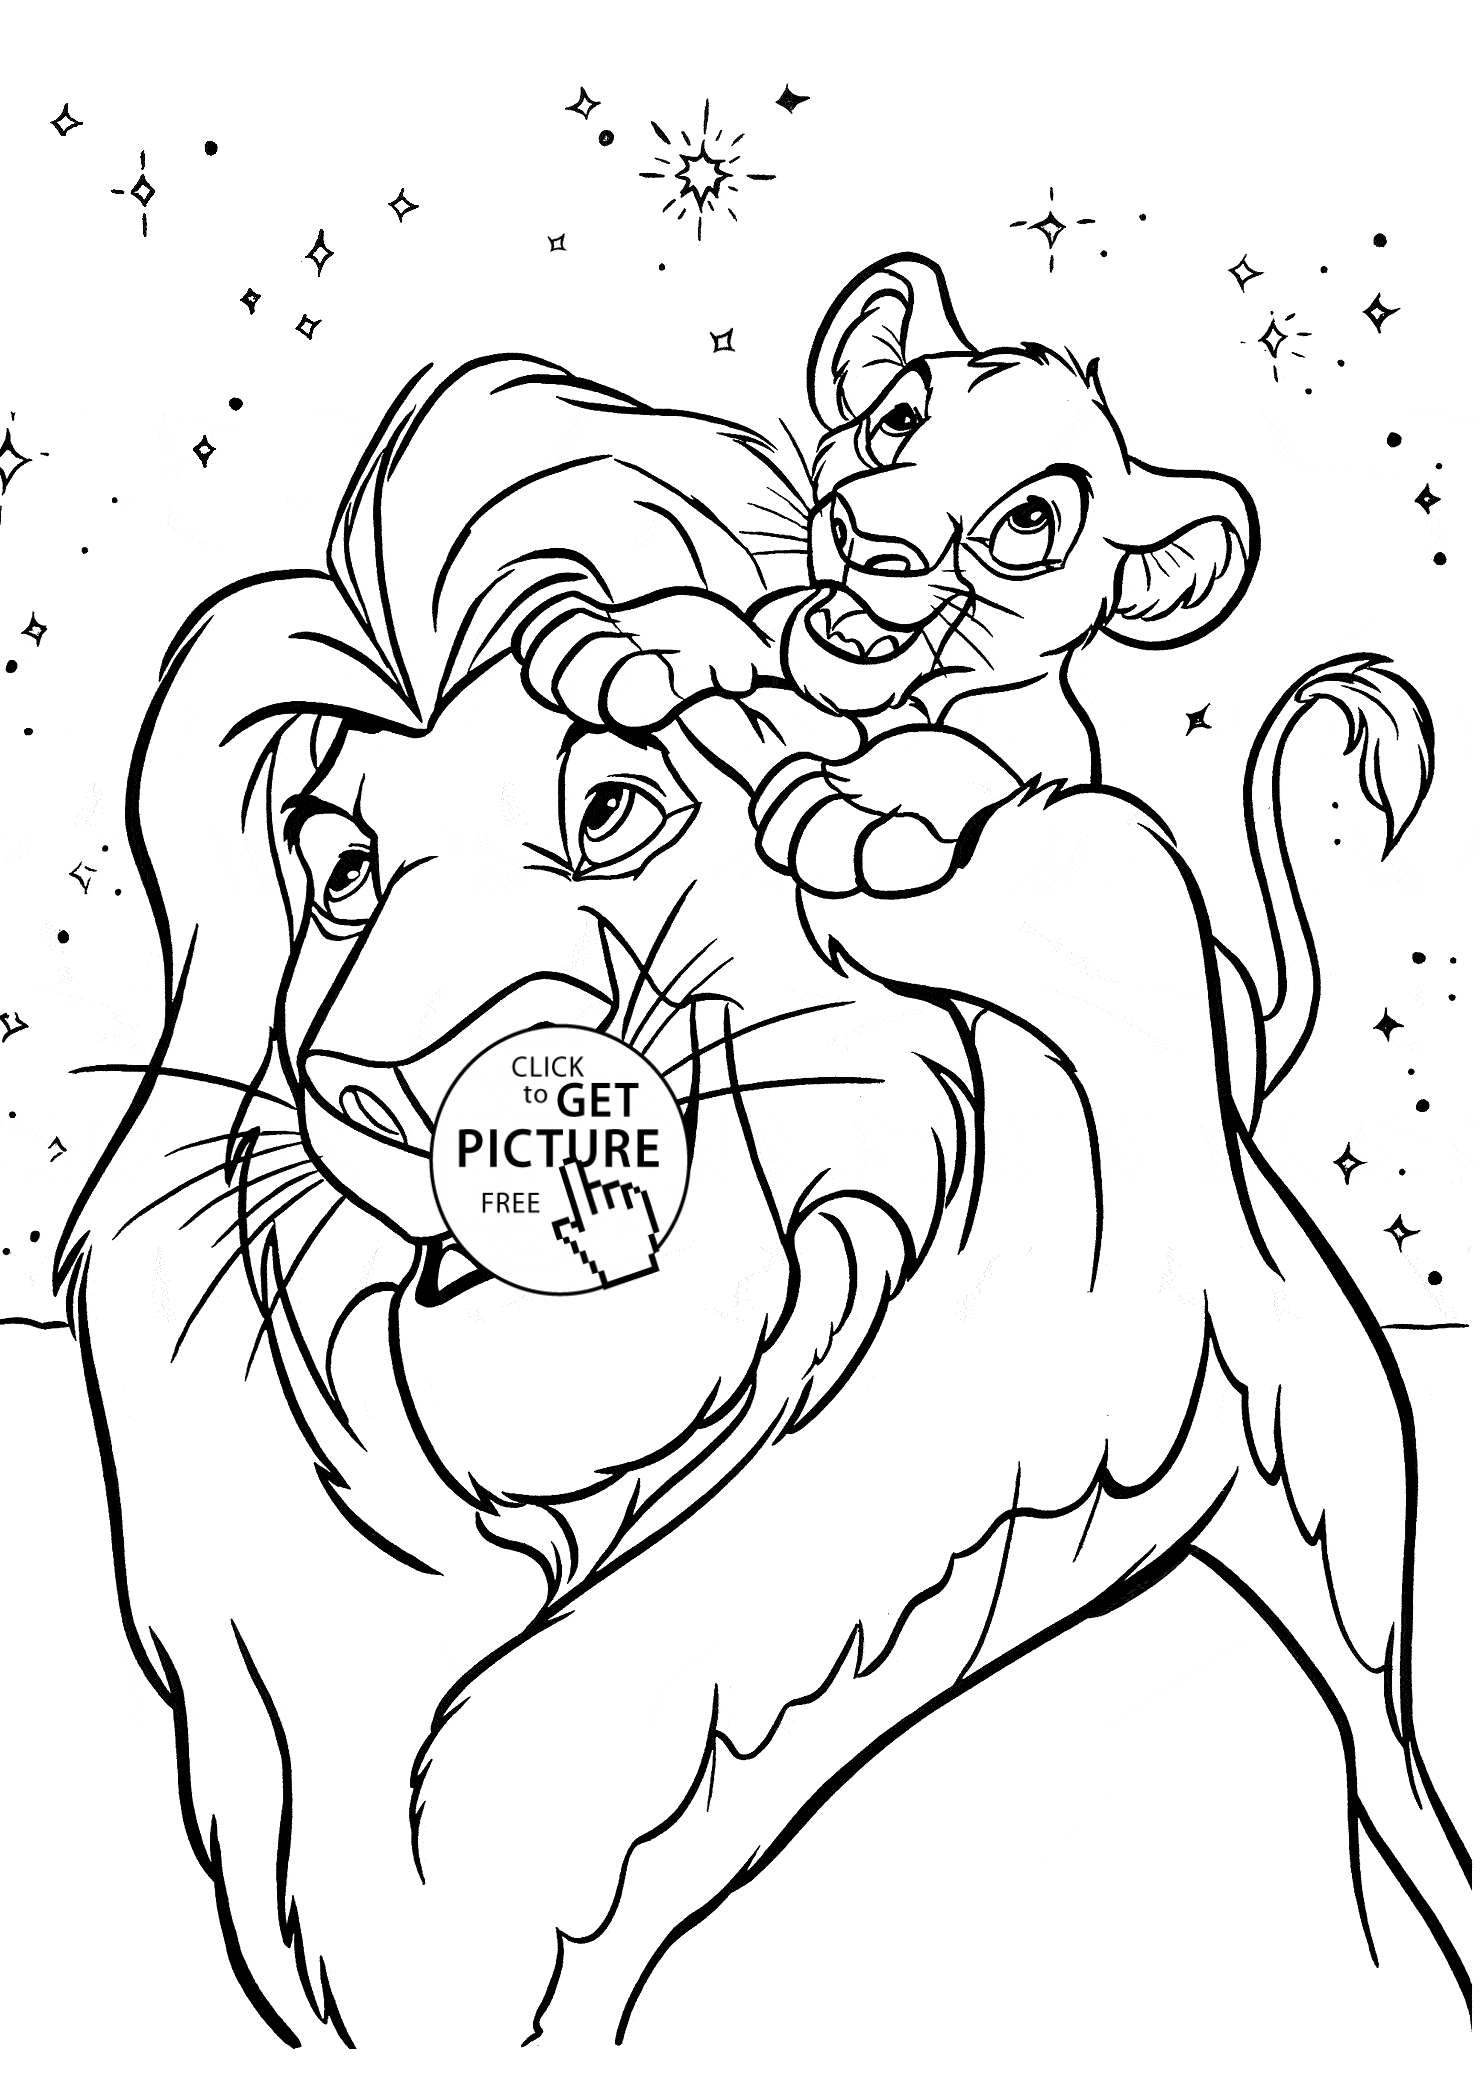 free colouring pages lion king lion king coloring page for kids disney coloring pages free lion king pages colouring 